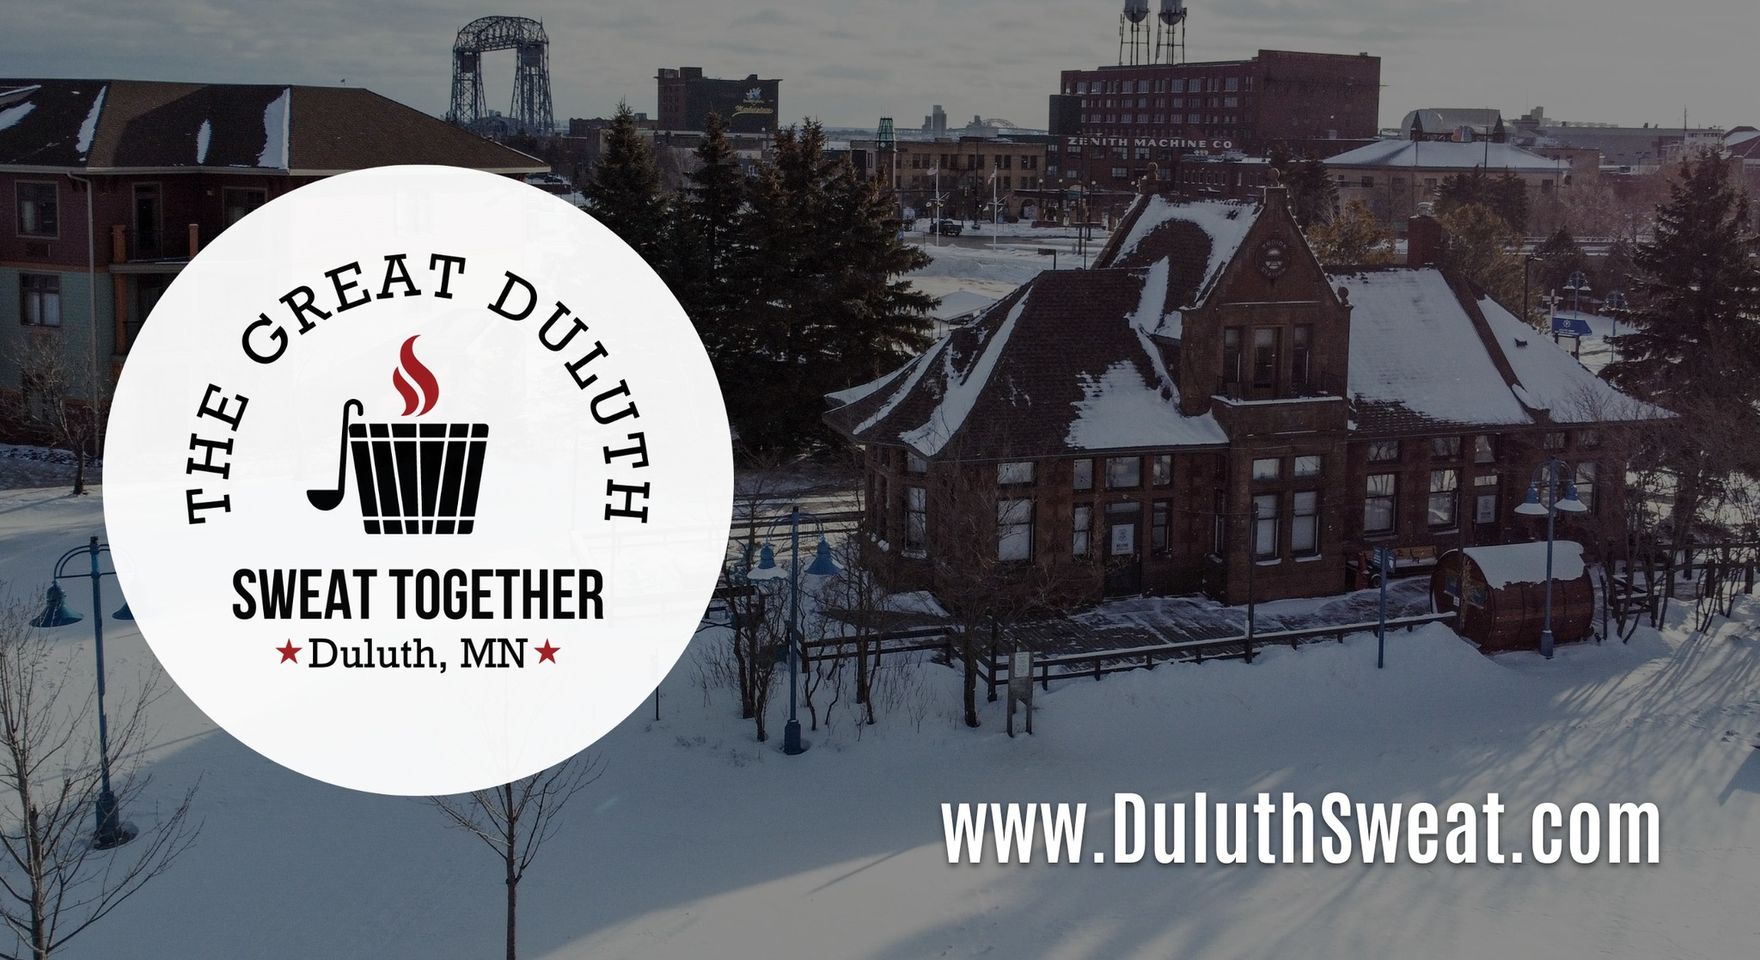 The Great Duluth Sweat Together